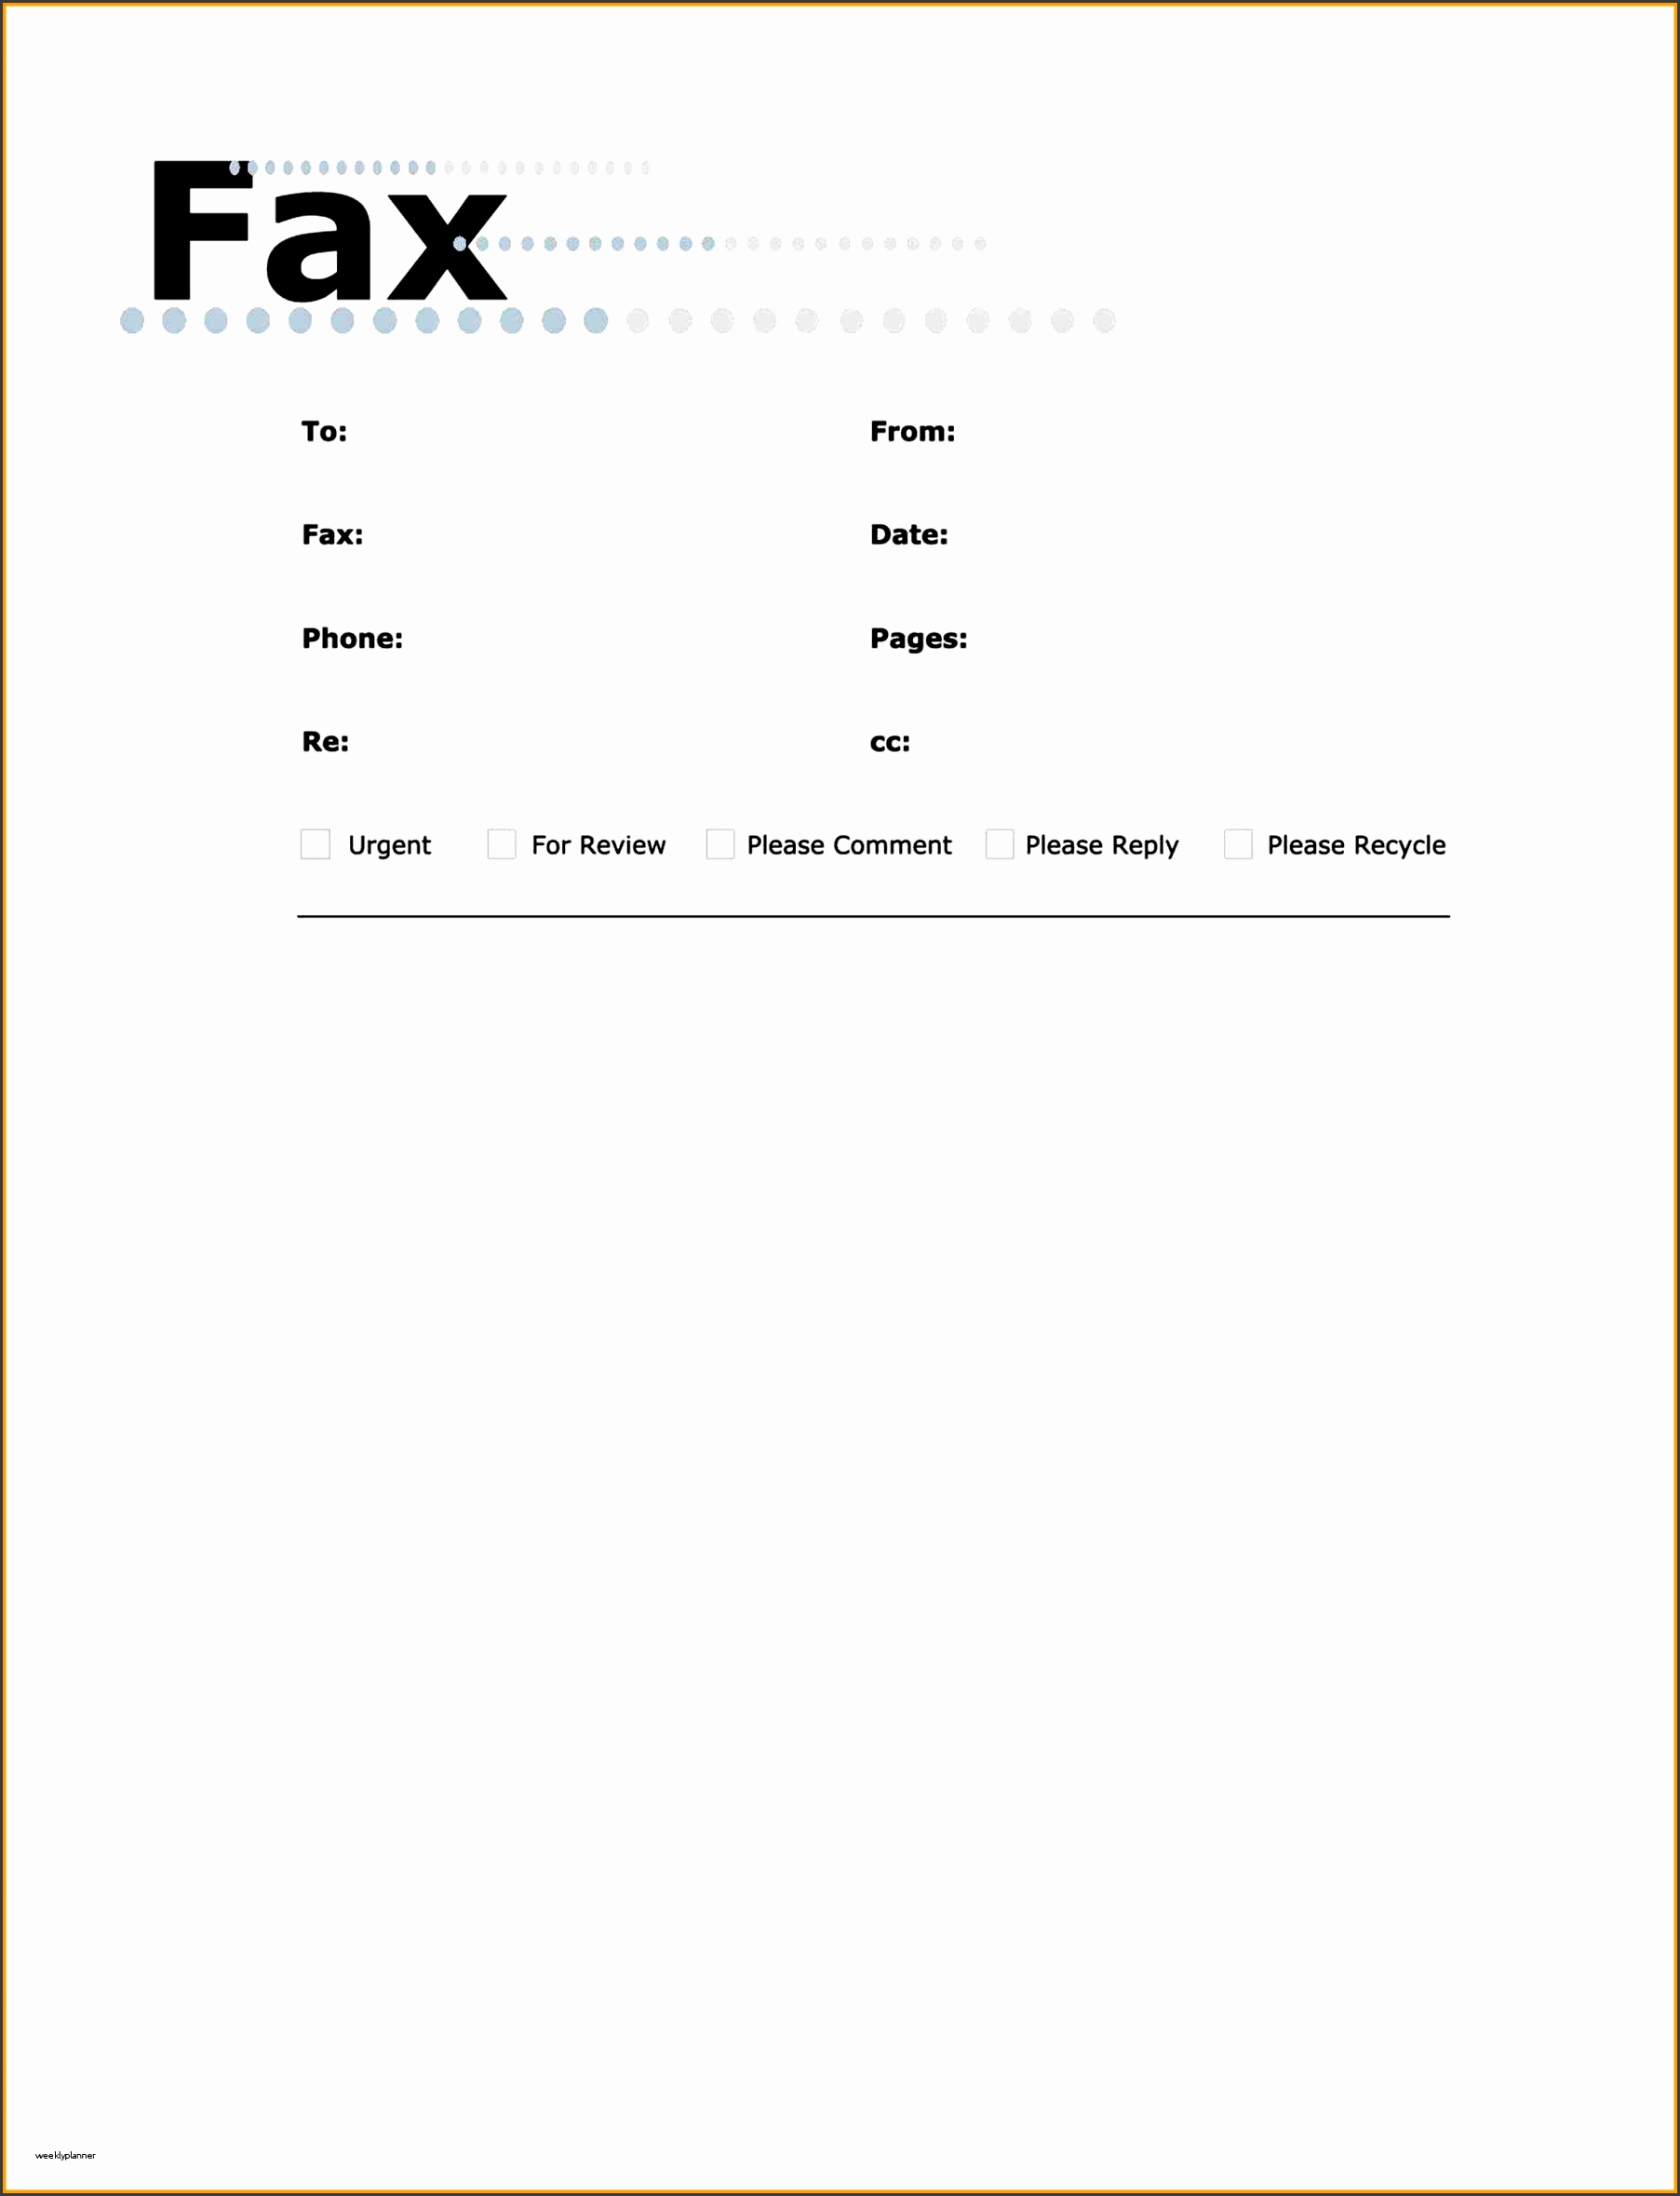 best of fax cover sheet printable weeklyplannerwebsite fax cover sheet printable unique sheets simple free fax